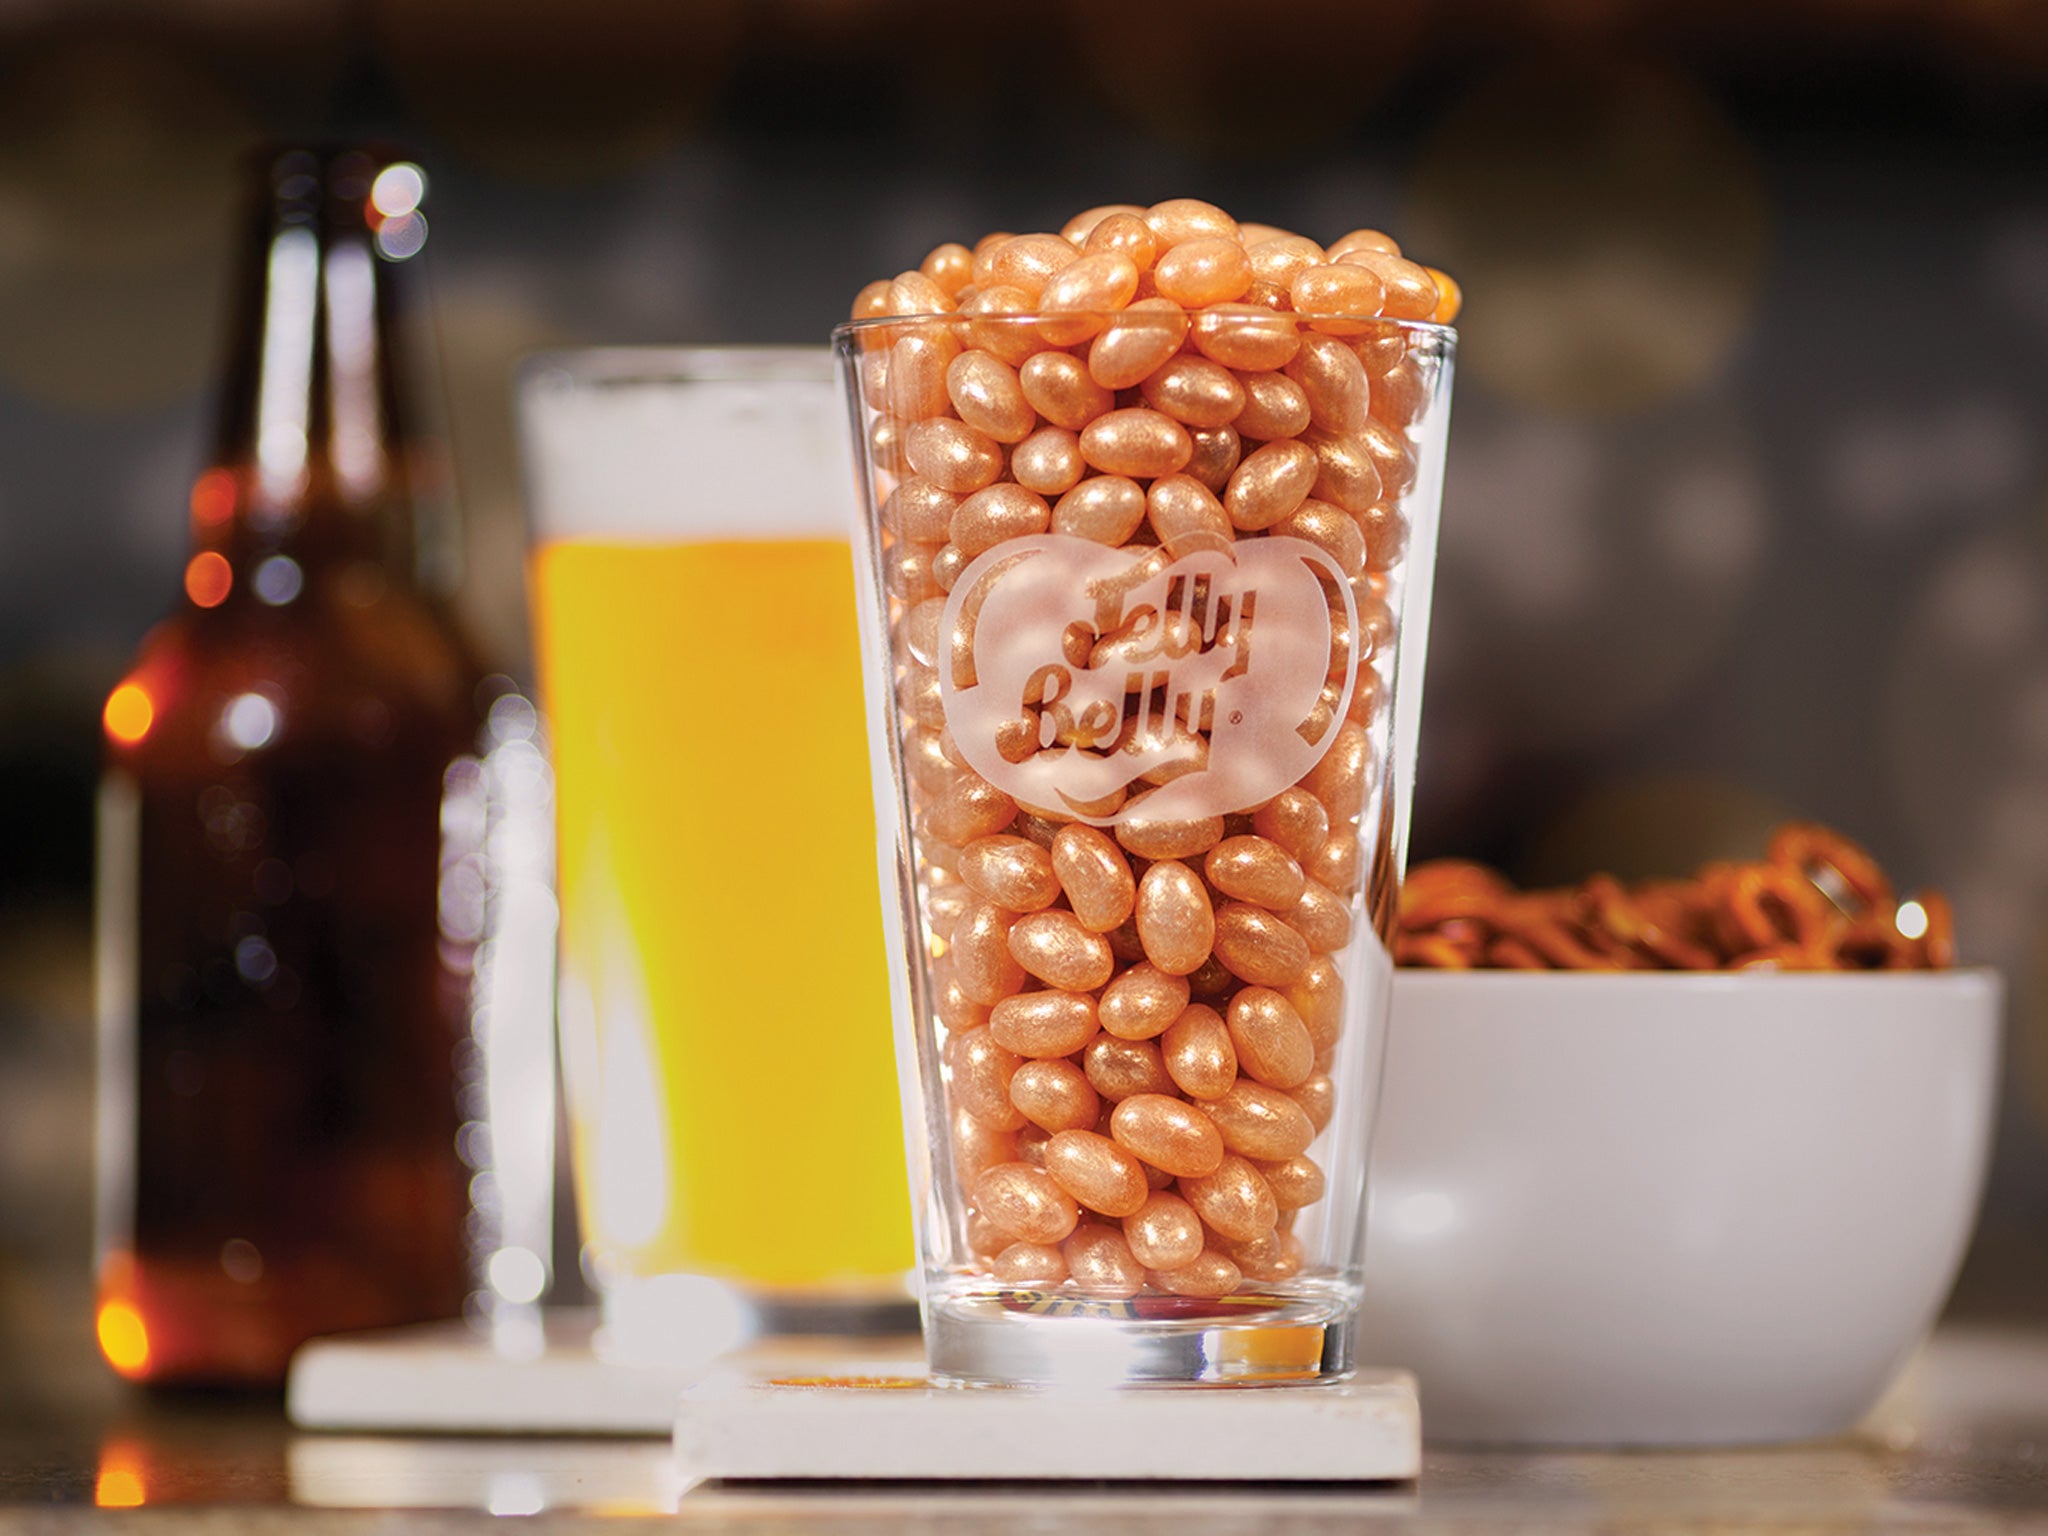 The world's first beer flavored jelly bean, the Draft Beer Jelly Belly jelly bean took three years to develop